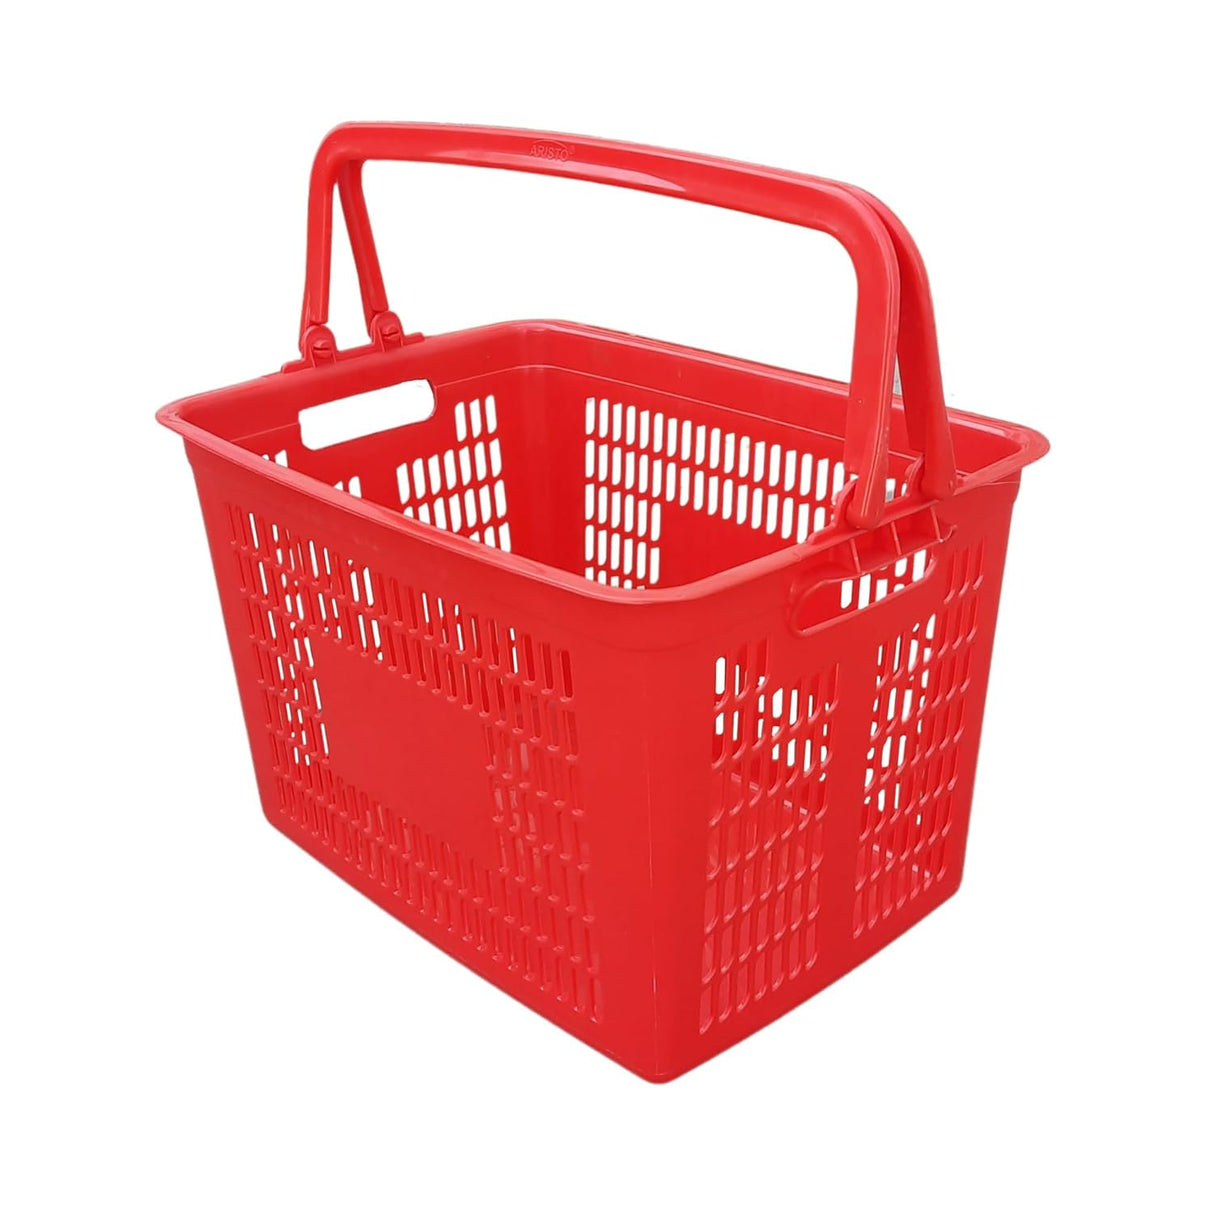 Singhal Super Market Grocery Vegetable Portable Plastic Shopping Rectangular Basket With Handle (Red)